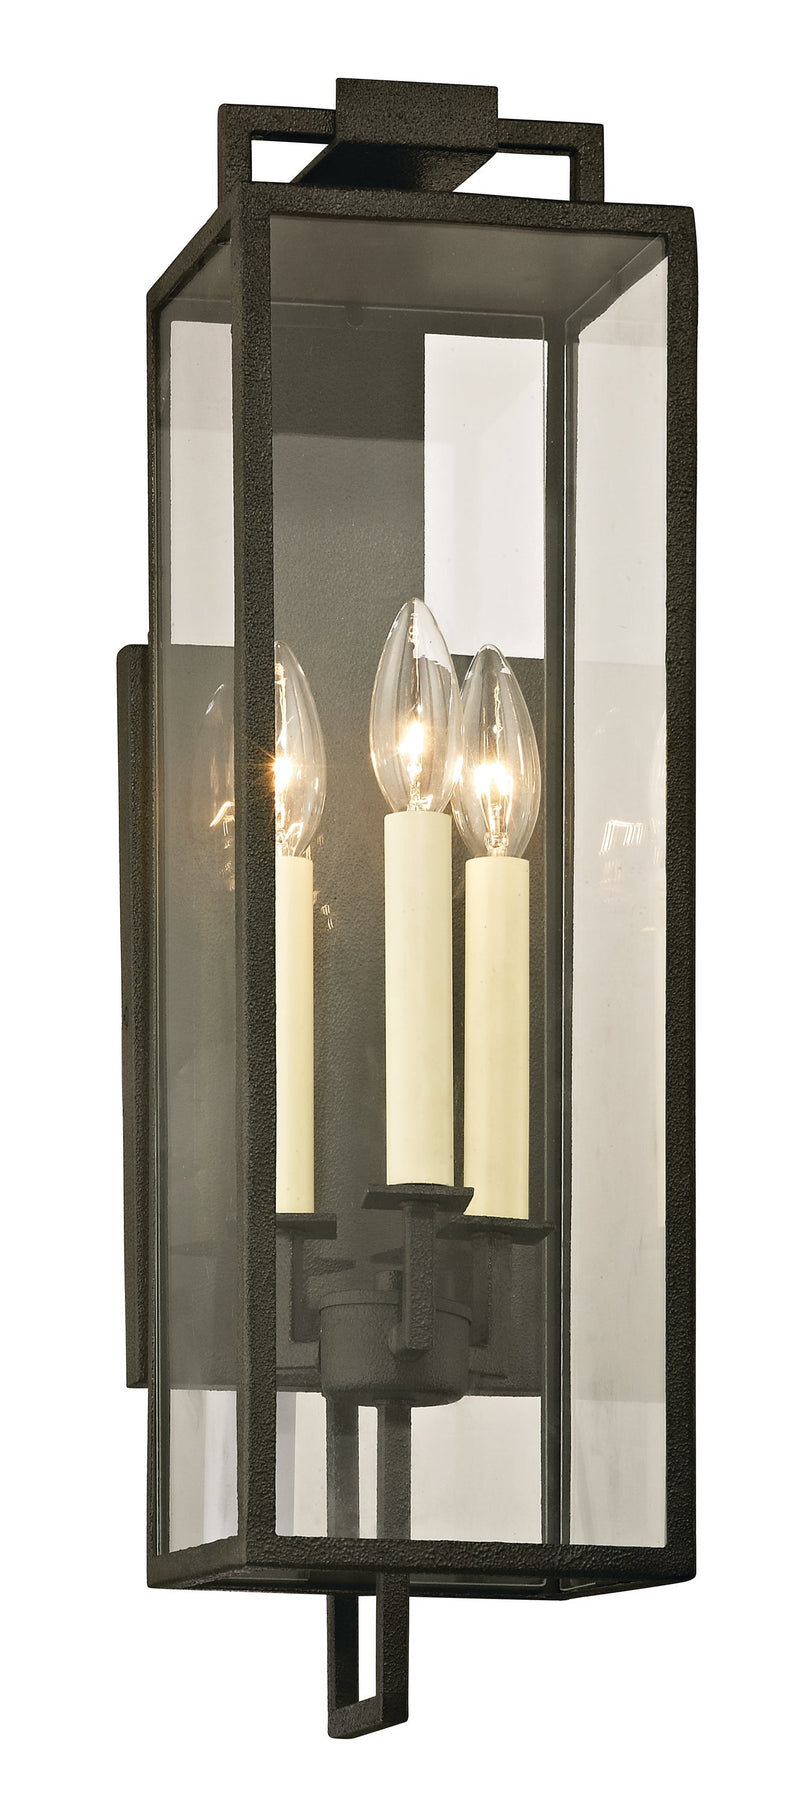 Lighting - Wall Sconce Beckham 3lt Wall // Forged Iron 